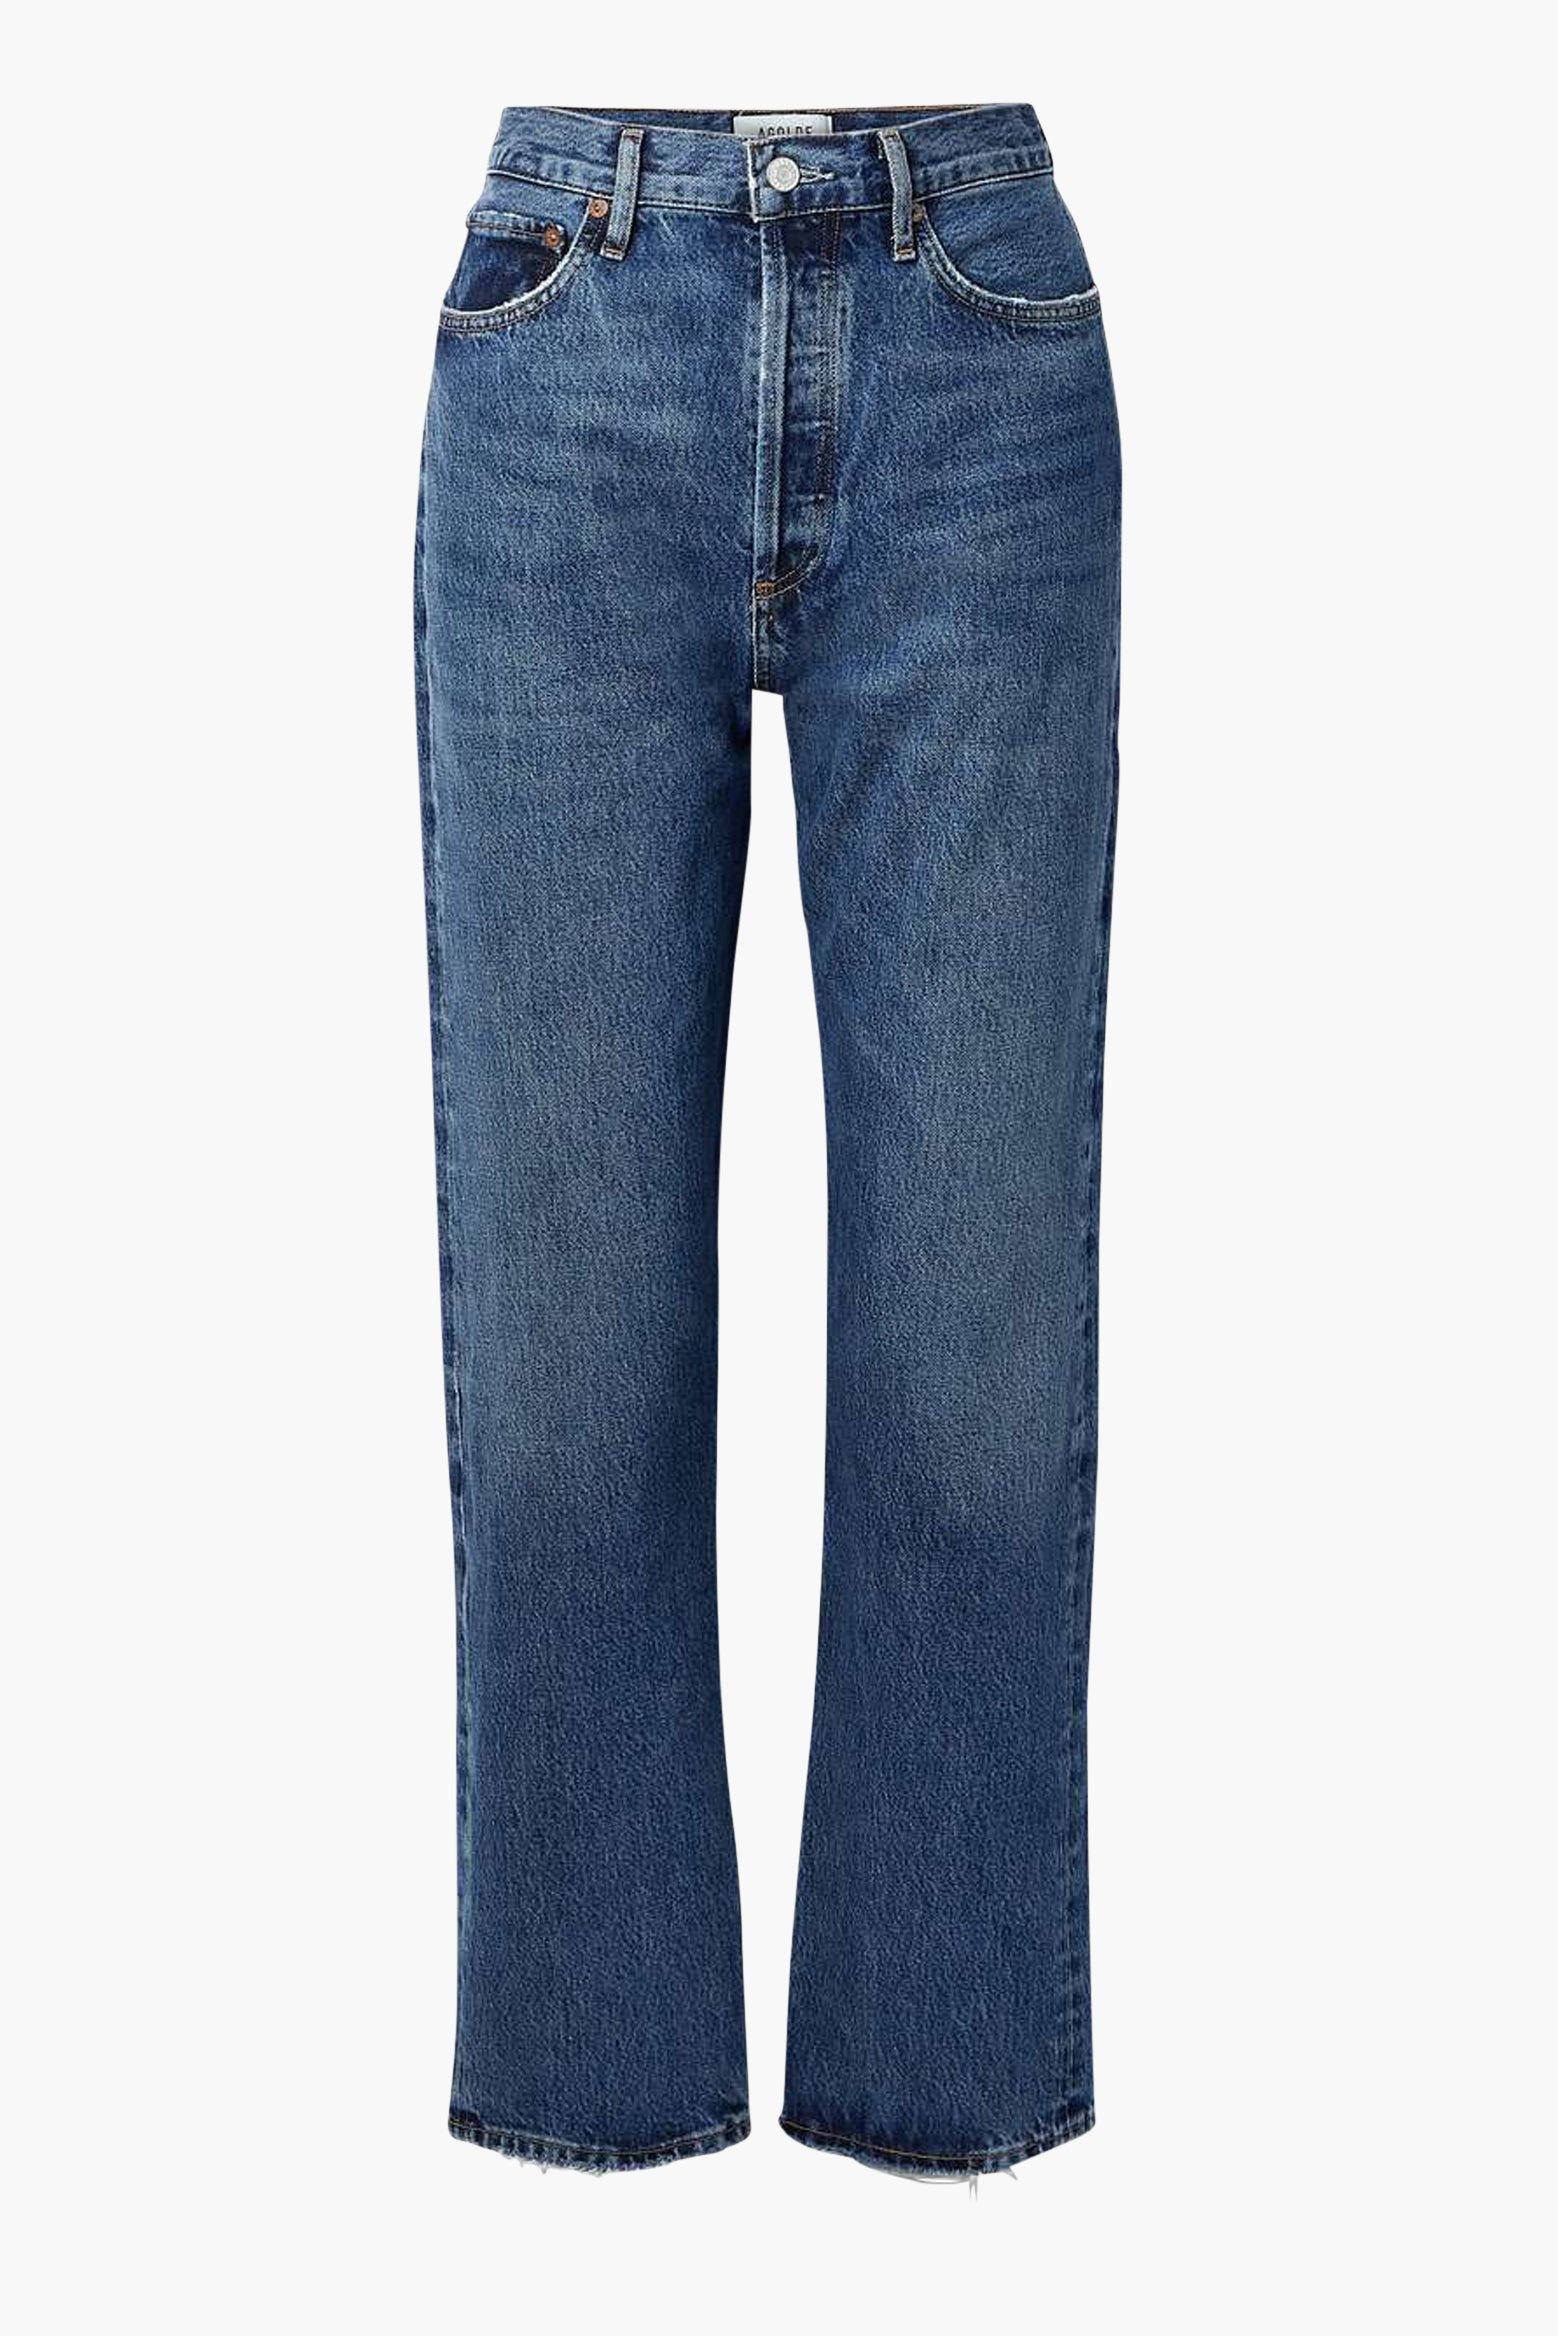 Agolde 90's Pinch Waist High Rise Straight Jean in Range from The New Trend